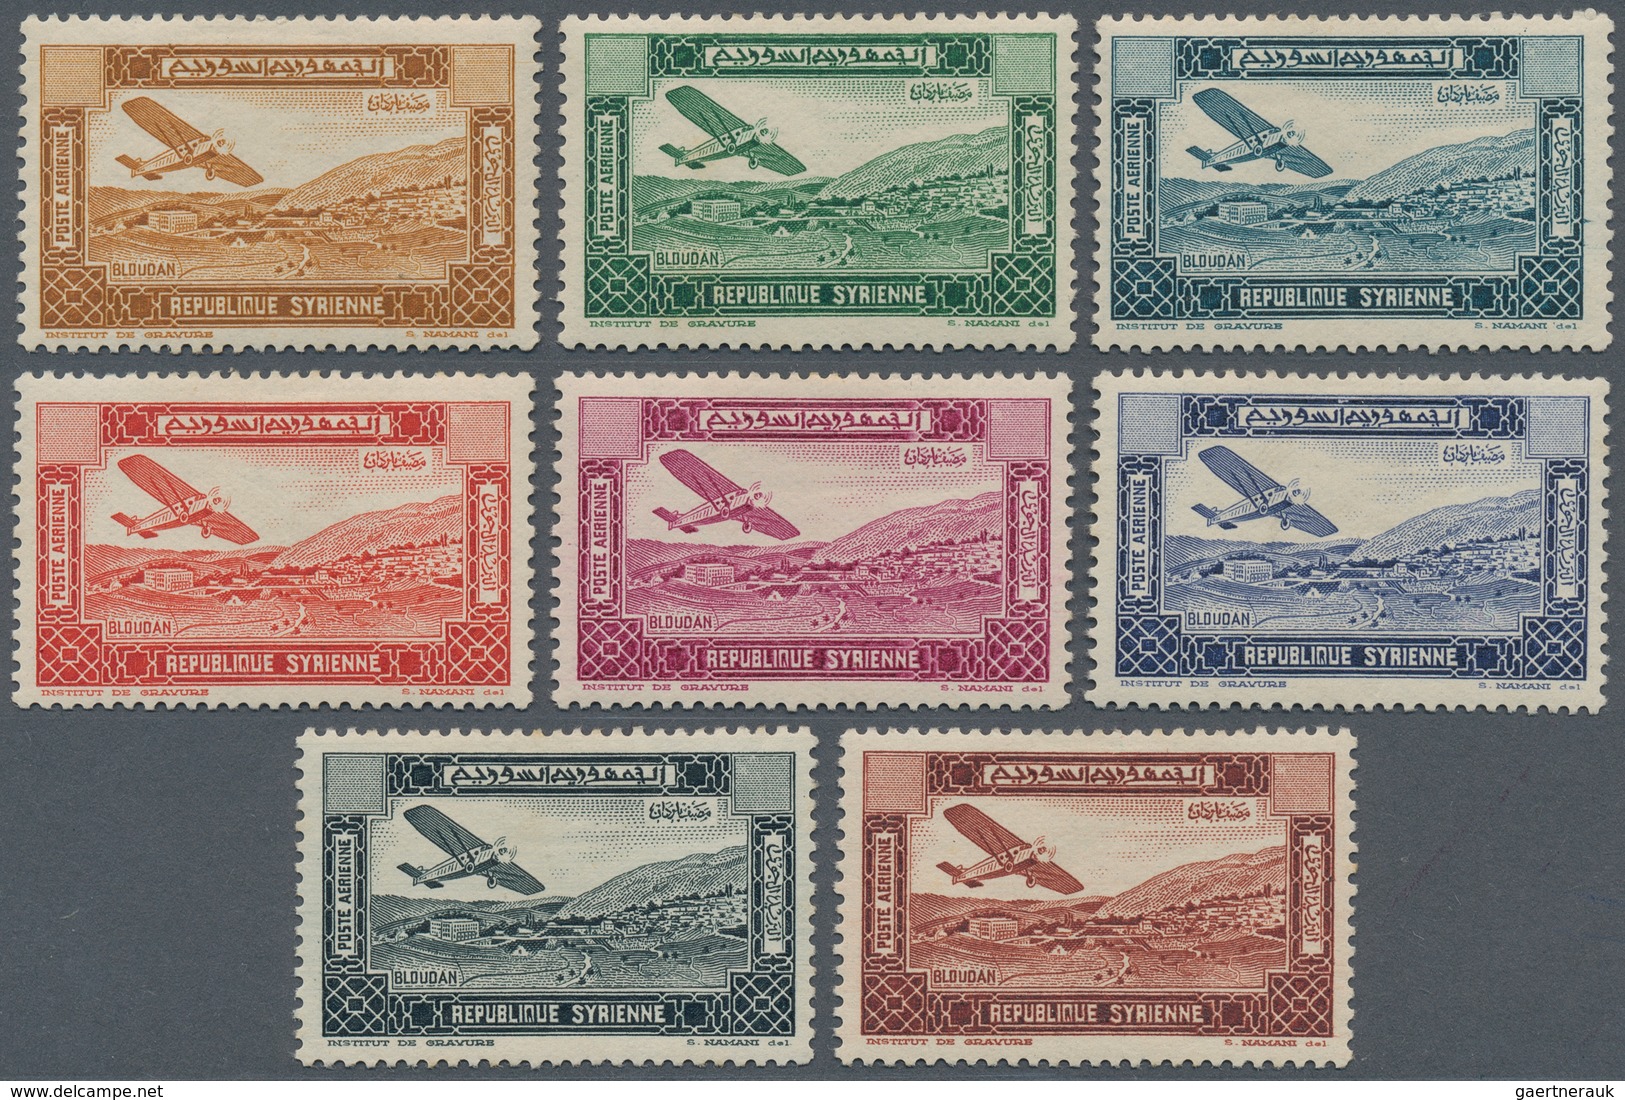 Syrien: 1934, 10 Years Republic Air Mail Issue 10 Proofs Without Value In Issued Colors, Mint Hinged - Siria